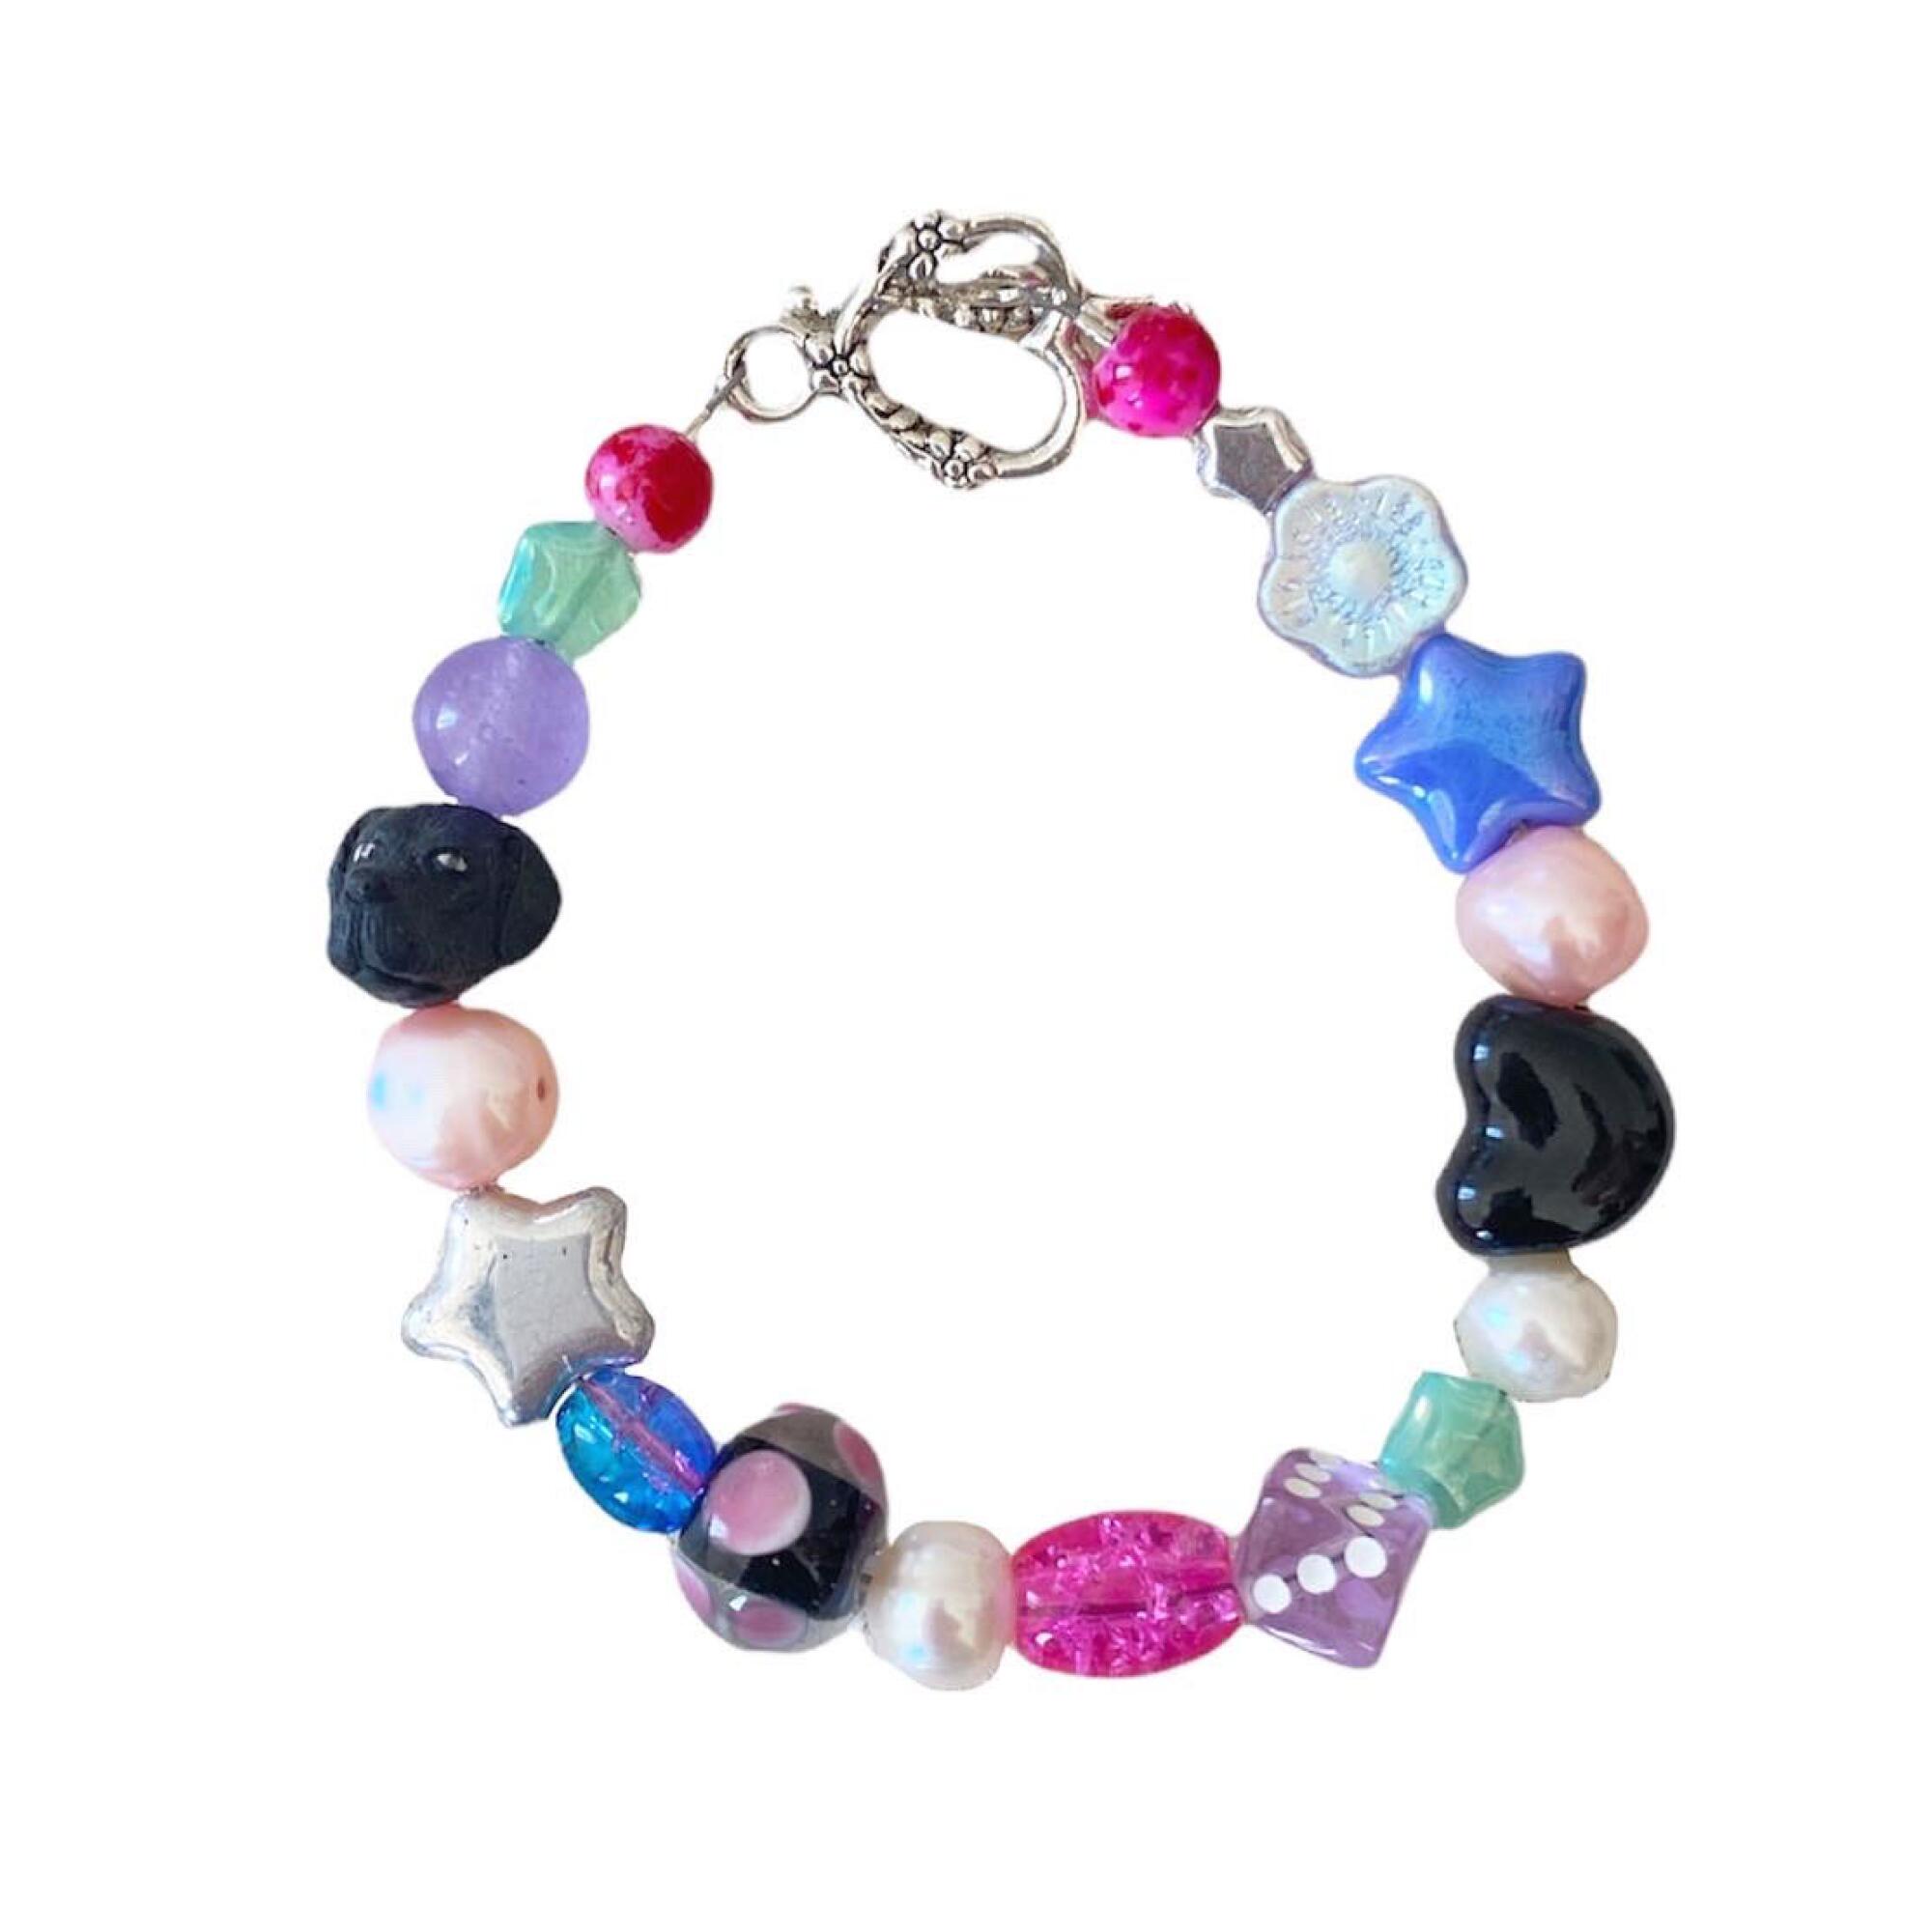 A bracelet made of colorful beads and charms.